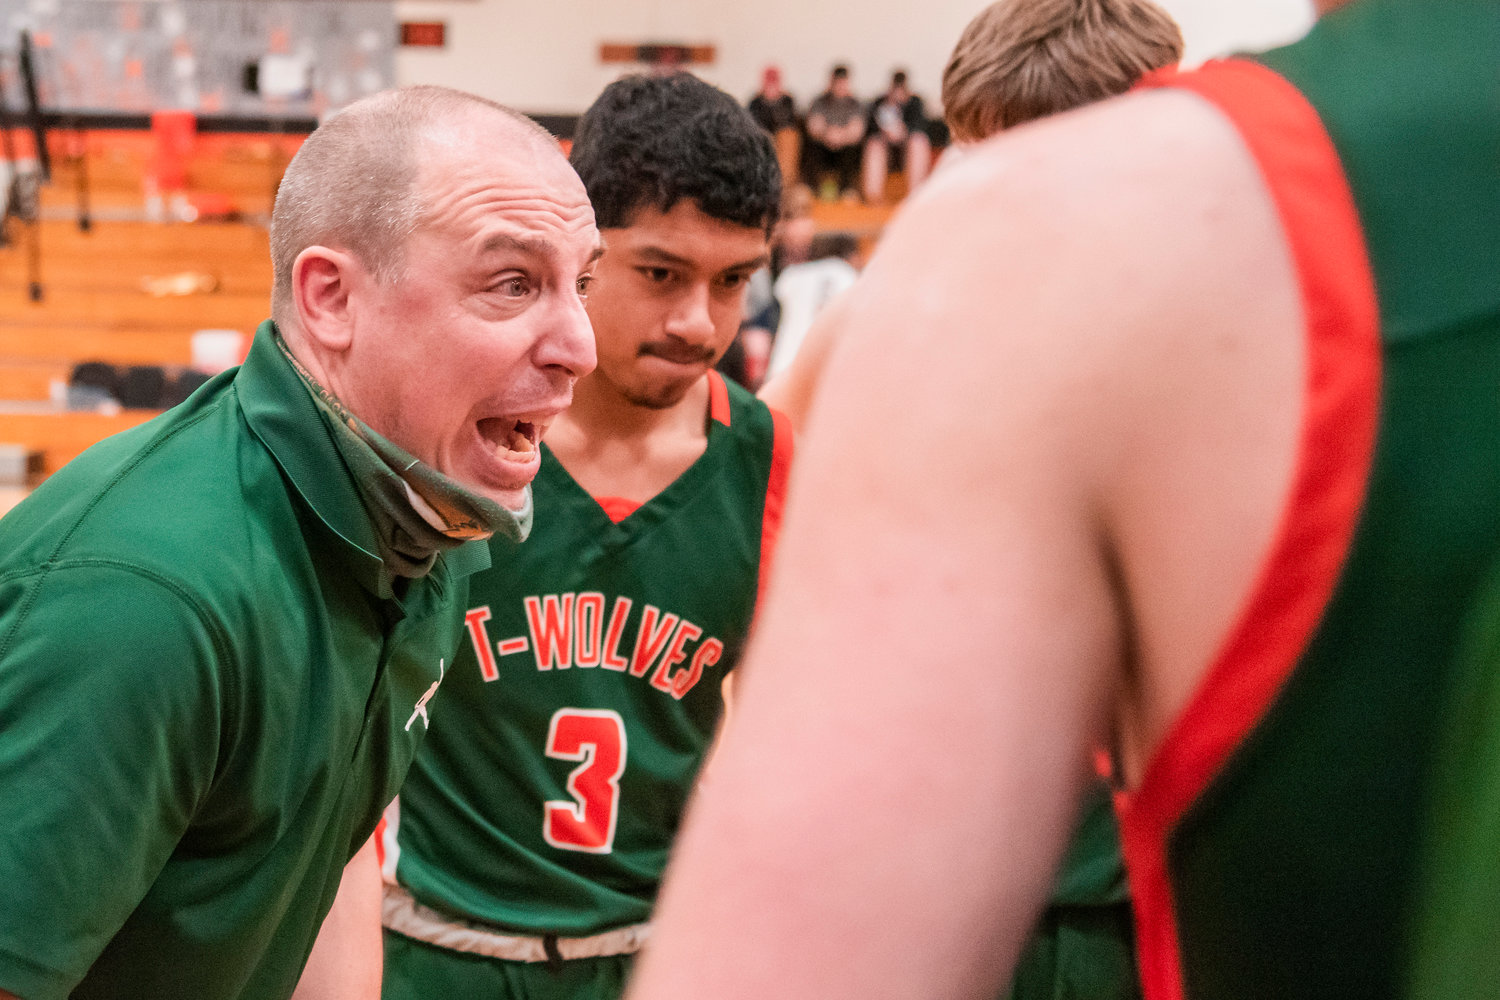 Morton-White Pass coach Chad Cramer yells to athletes during a game in Napavine Tuesday night.